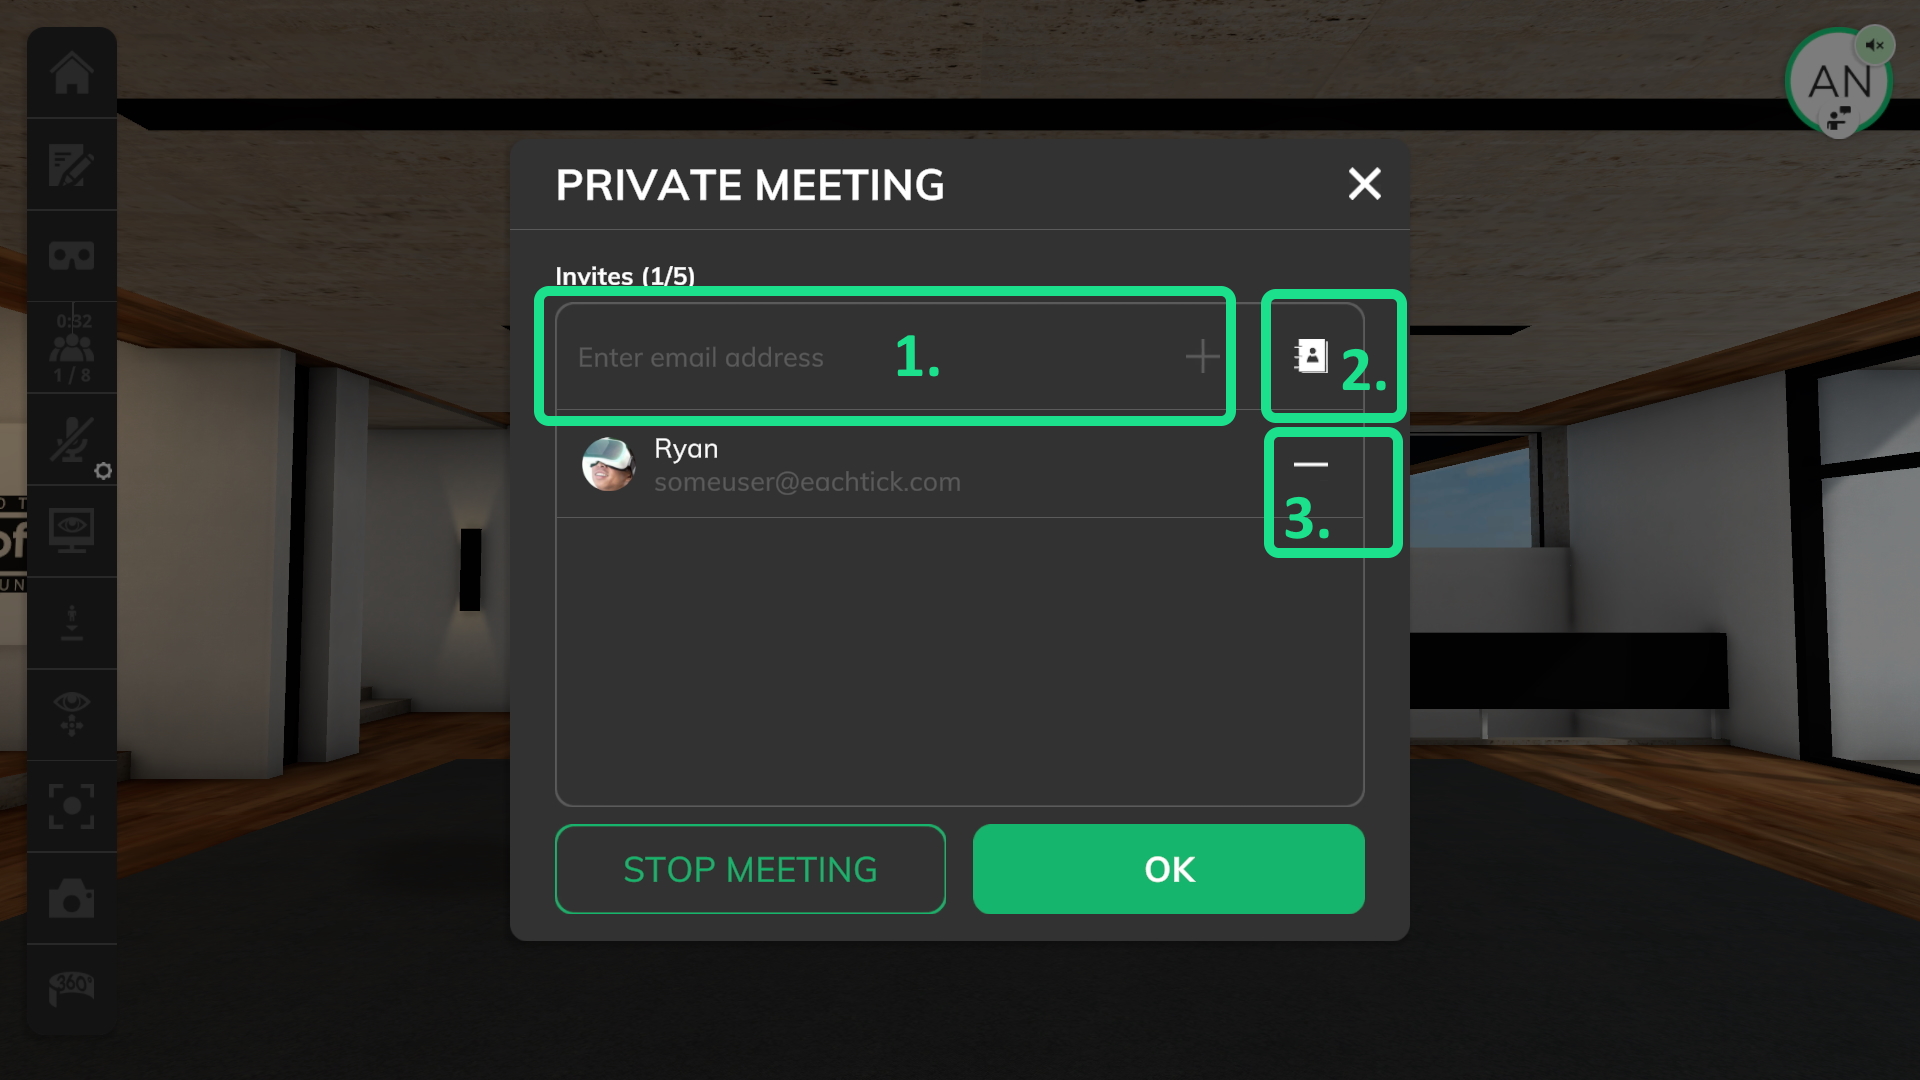 Started private meeting 